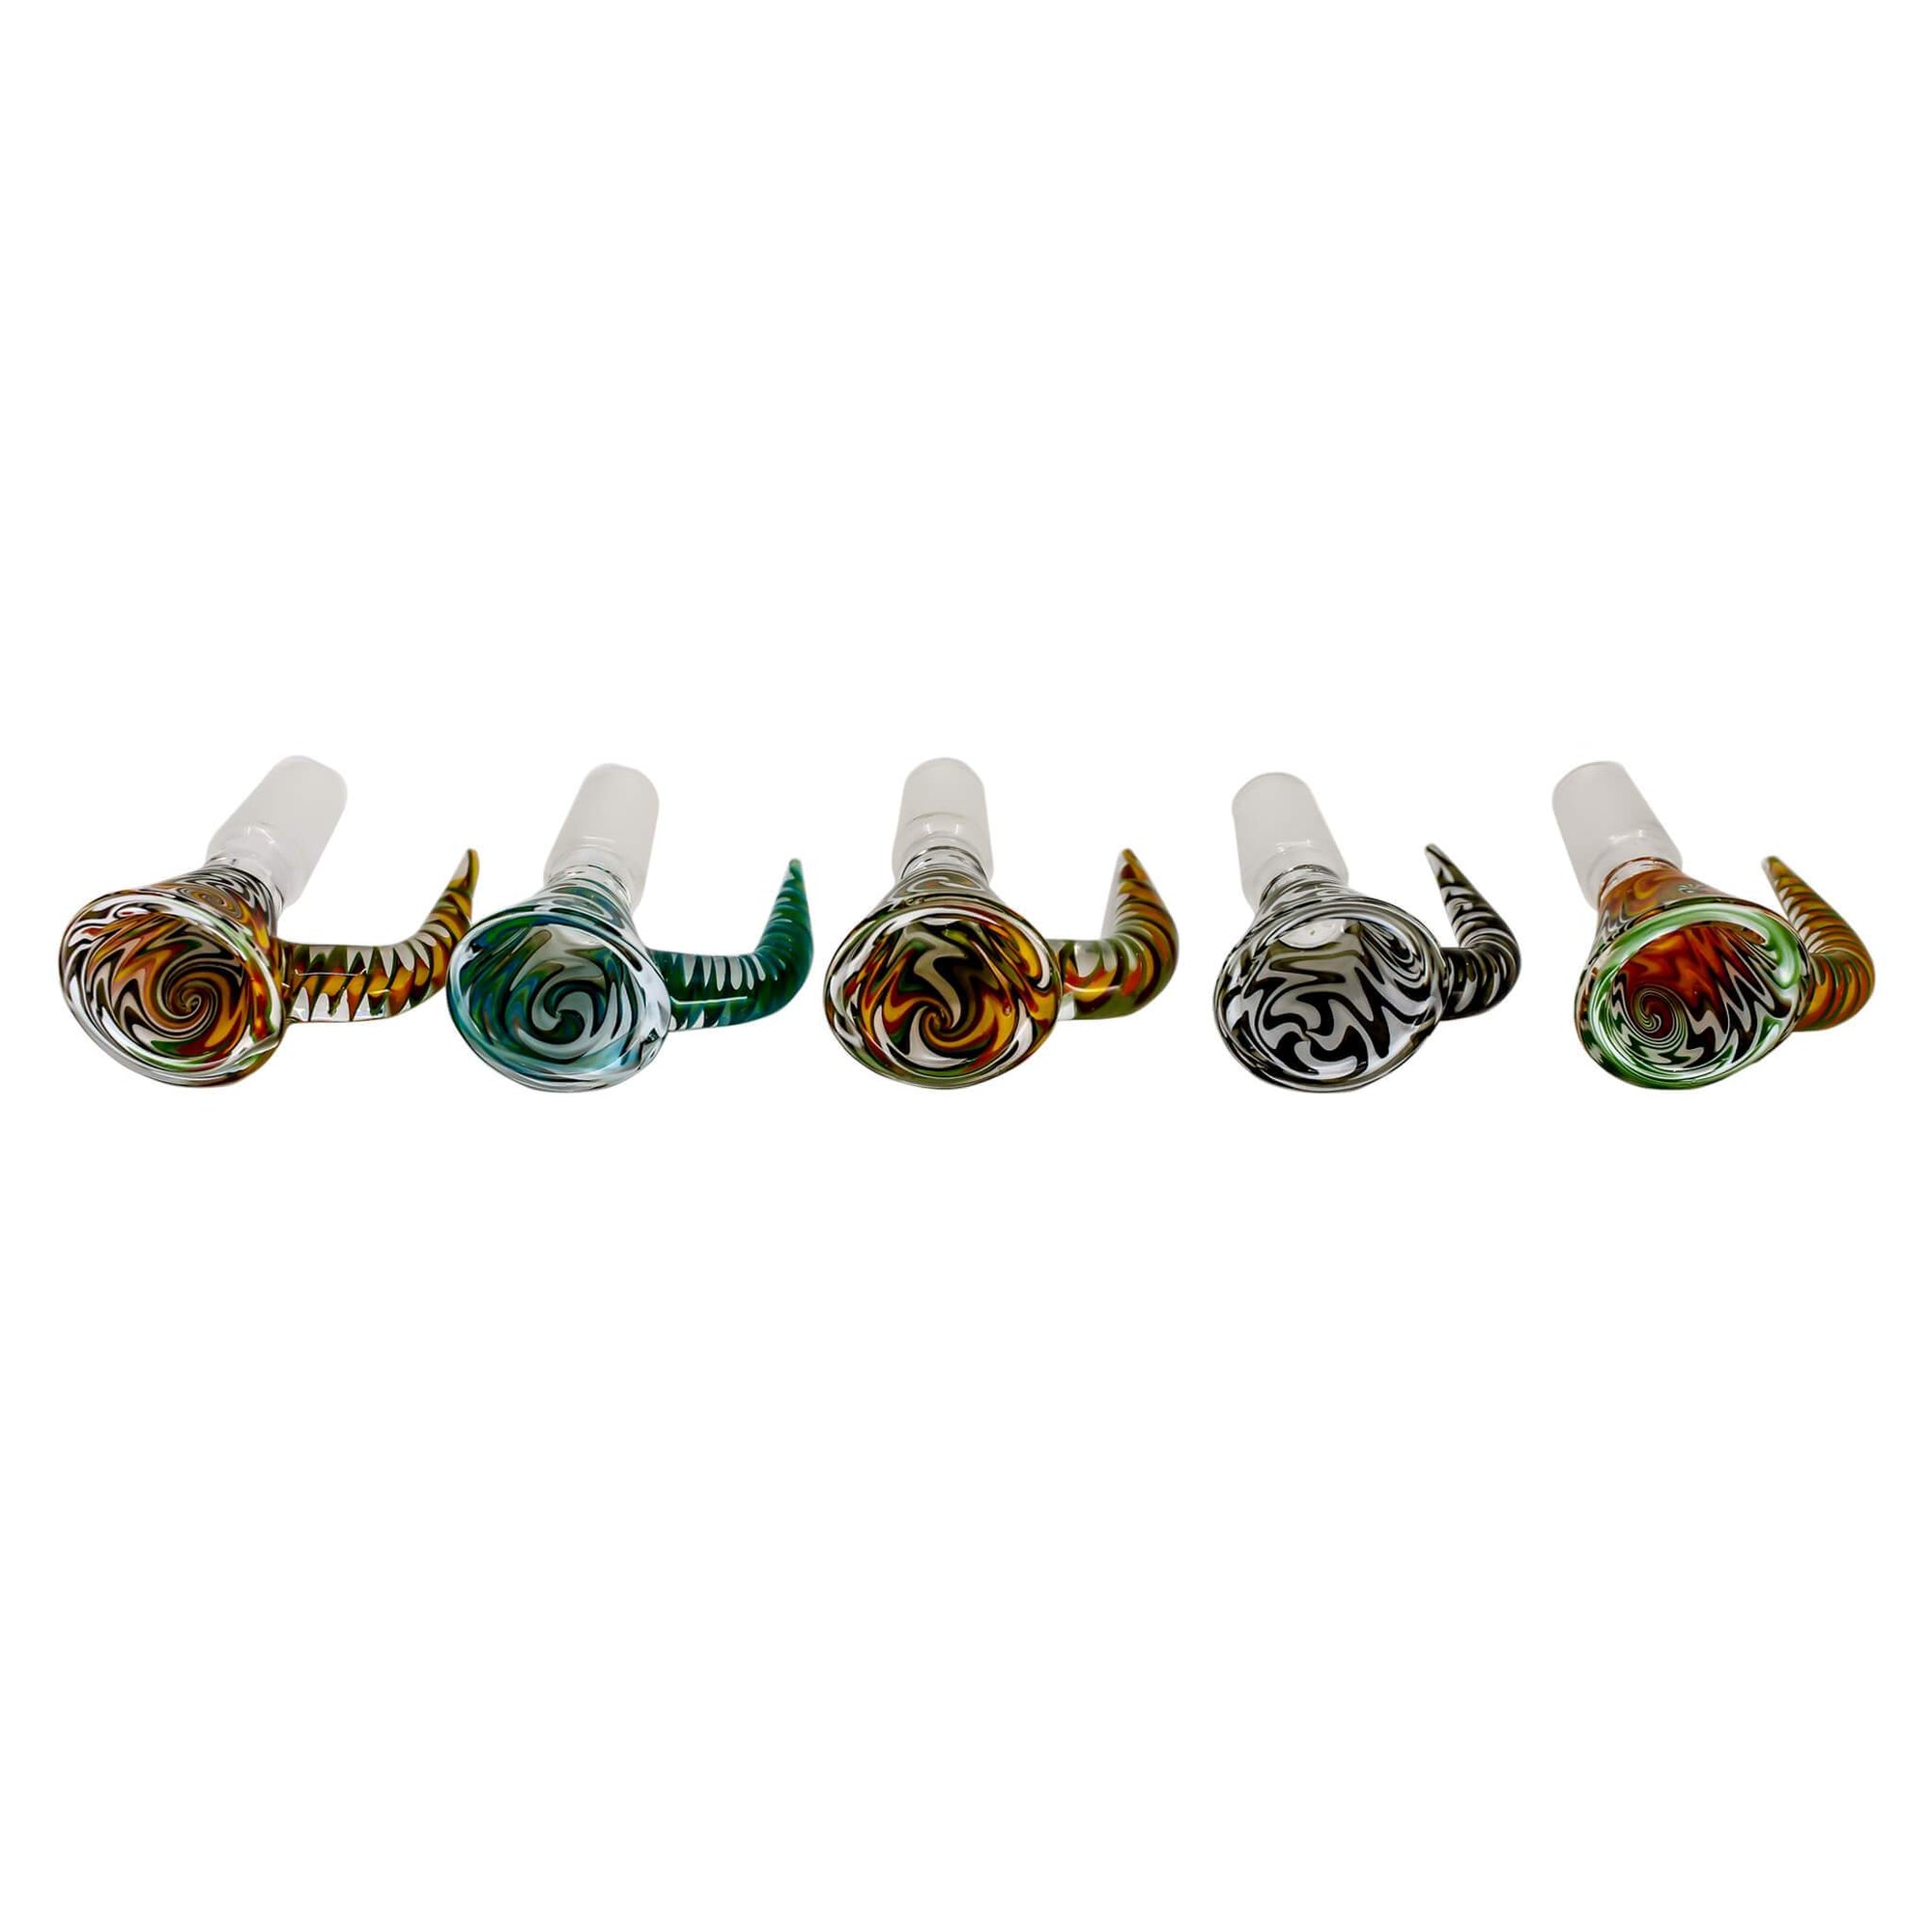 Trippy Dragon Tail Flower Bowl | All Six Color Variations View | the dabbing specialists